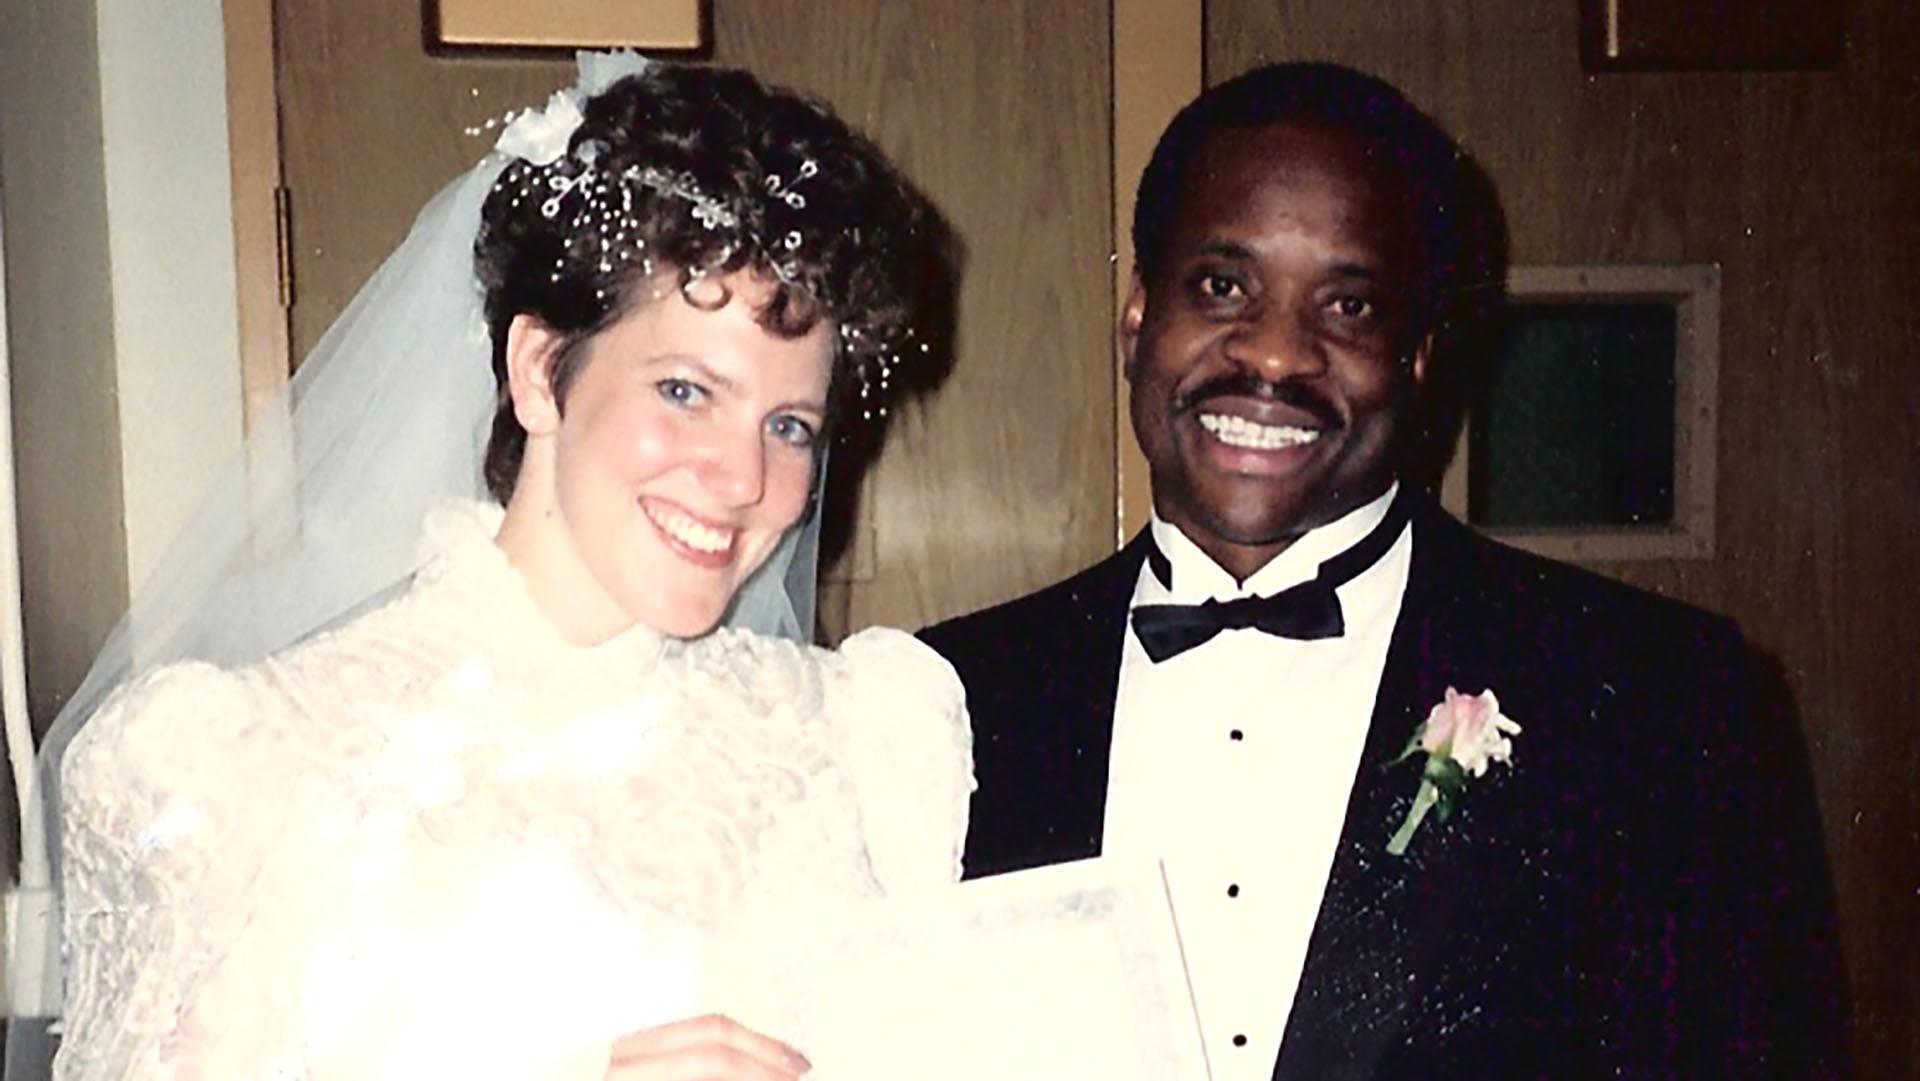 Clarence Thomas and his new wife Virginia displaying their marriage license on their wedding day.